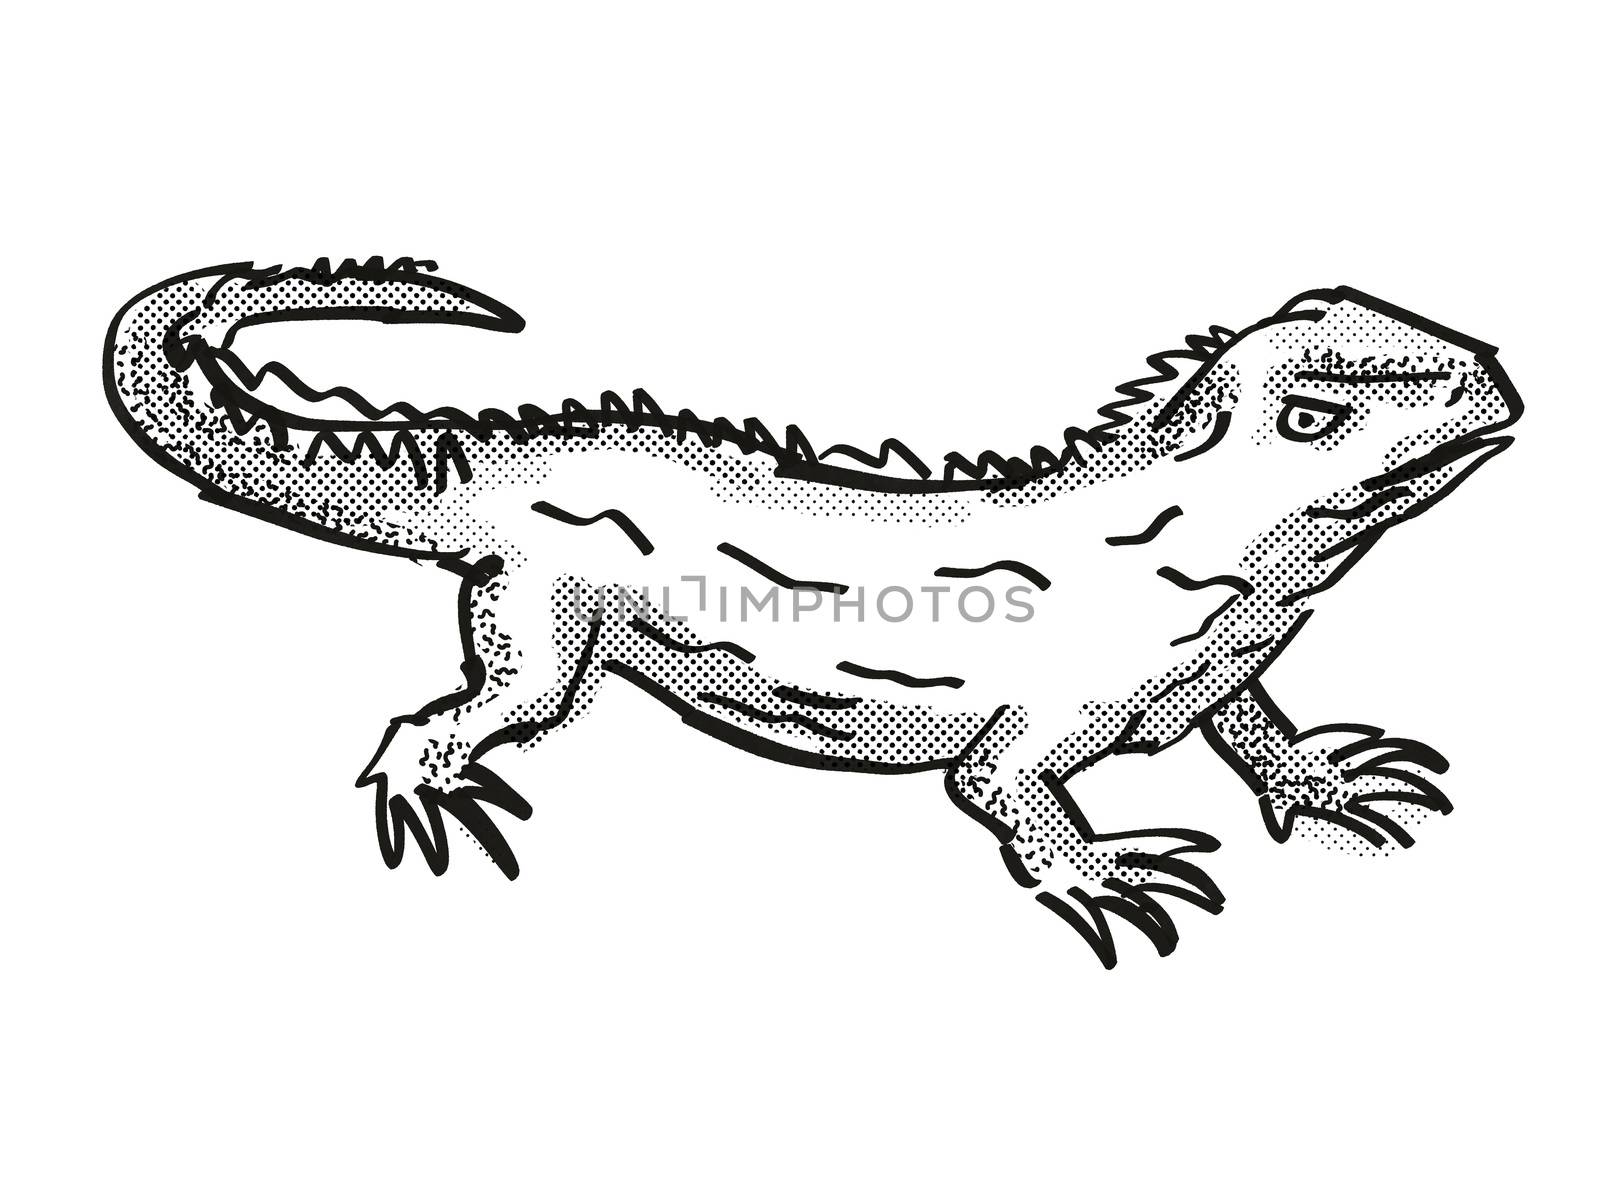 Retro cartoon style drawing of a Tuatara , a native New Zealand wildlife on isolated white background done in black and white